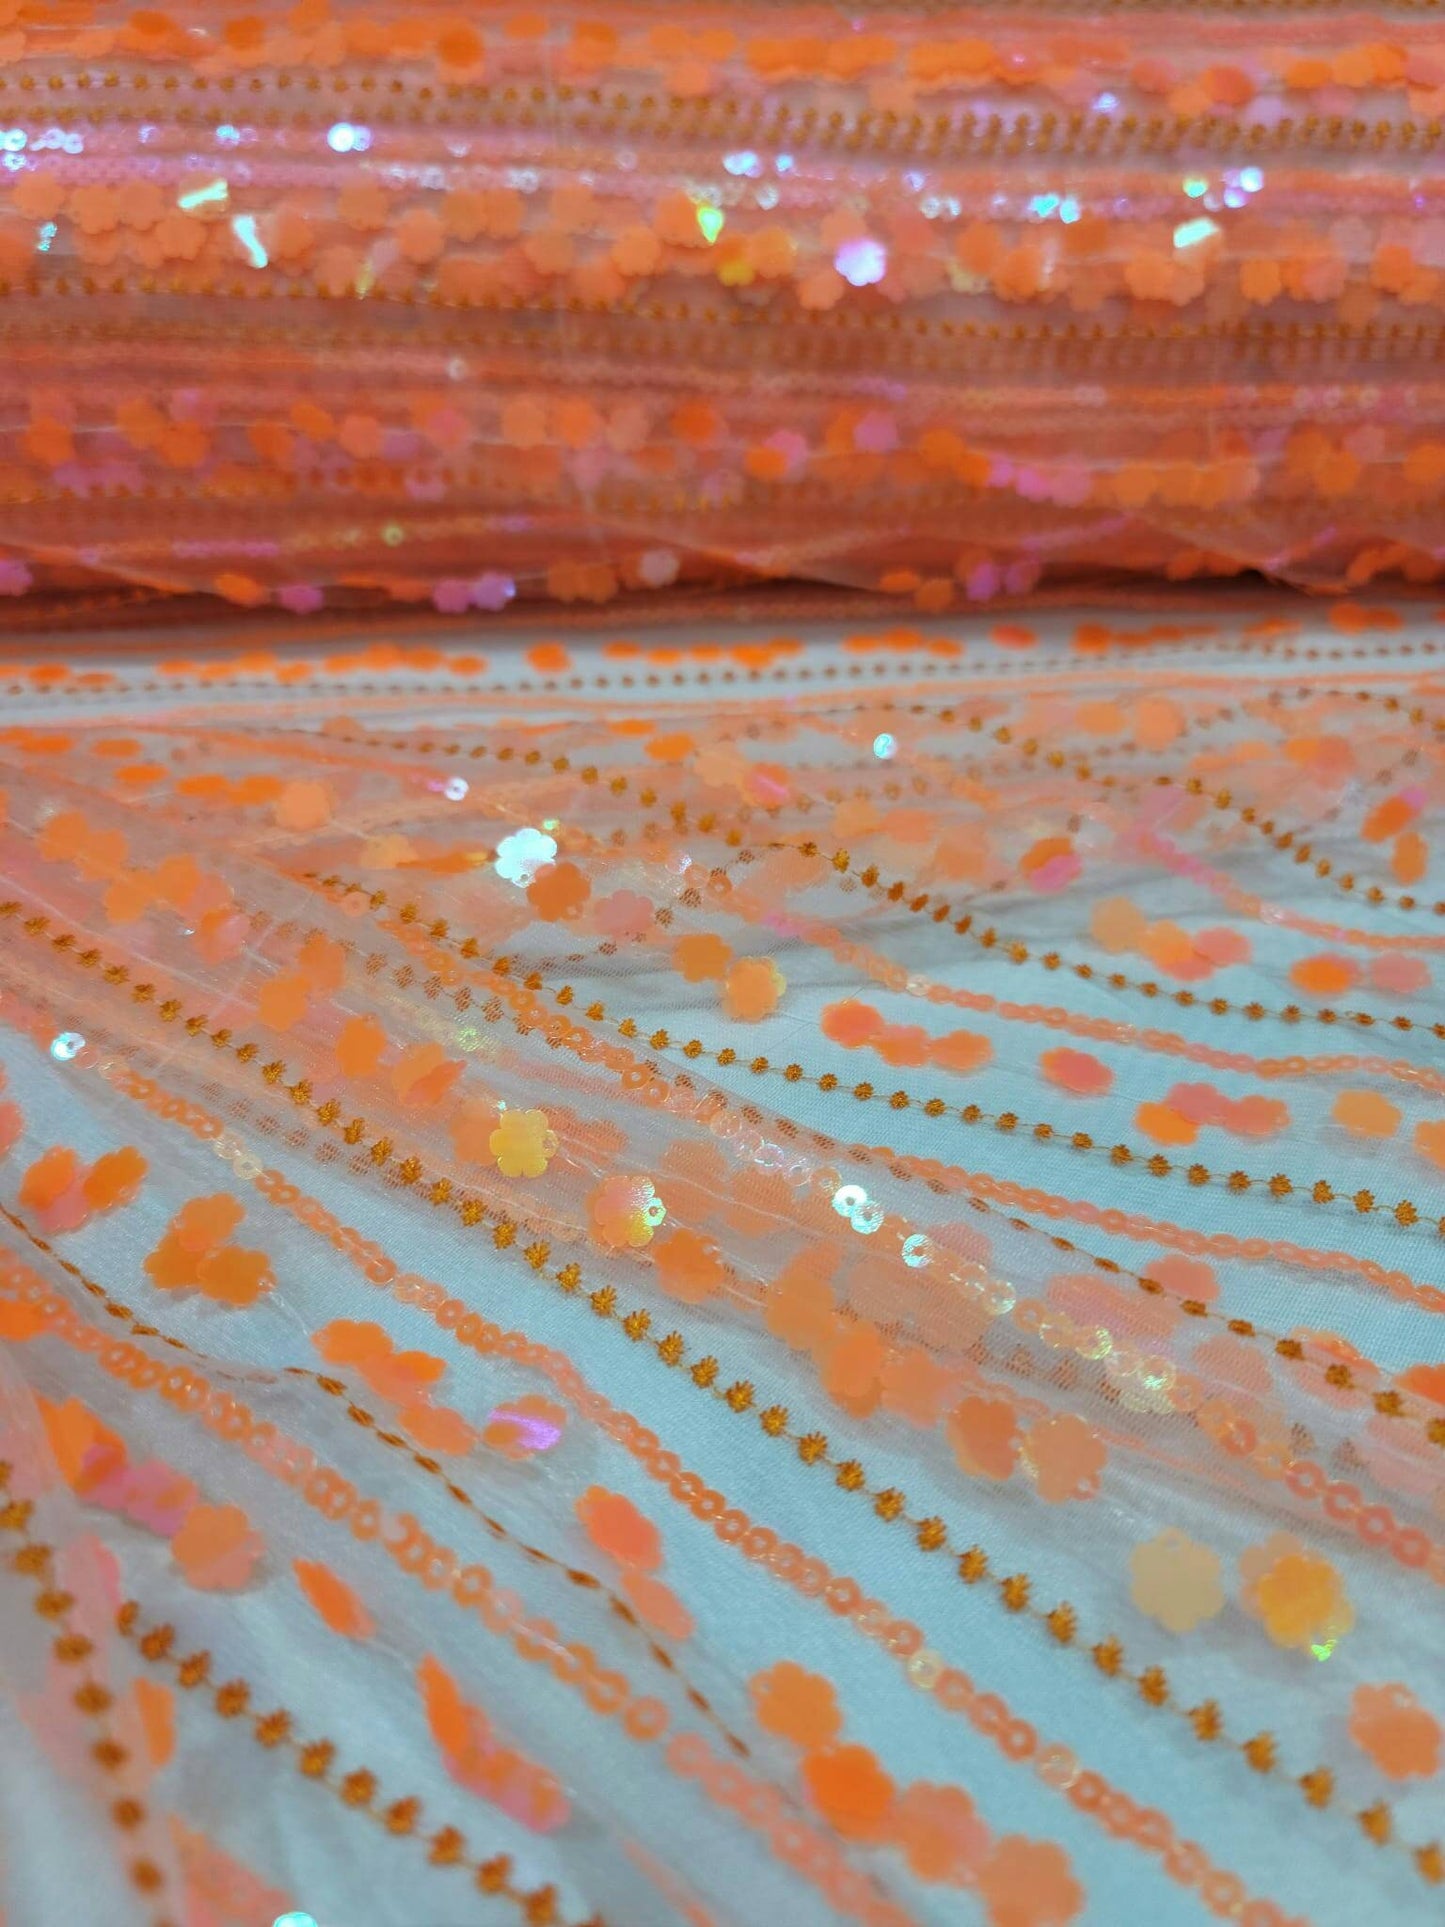 Orange Lace Neon Iridescent Hologram Sequin Floral Flowers  Fabric By The Yard Gown Quinceañera Bridal Evening Dress